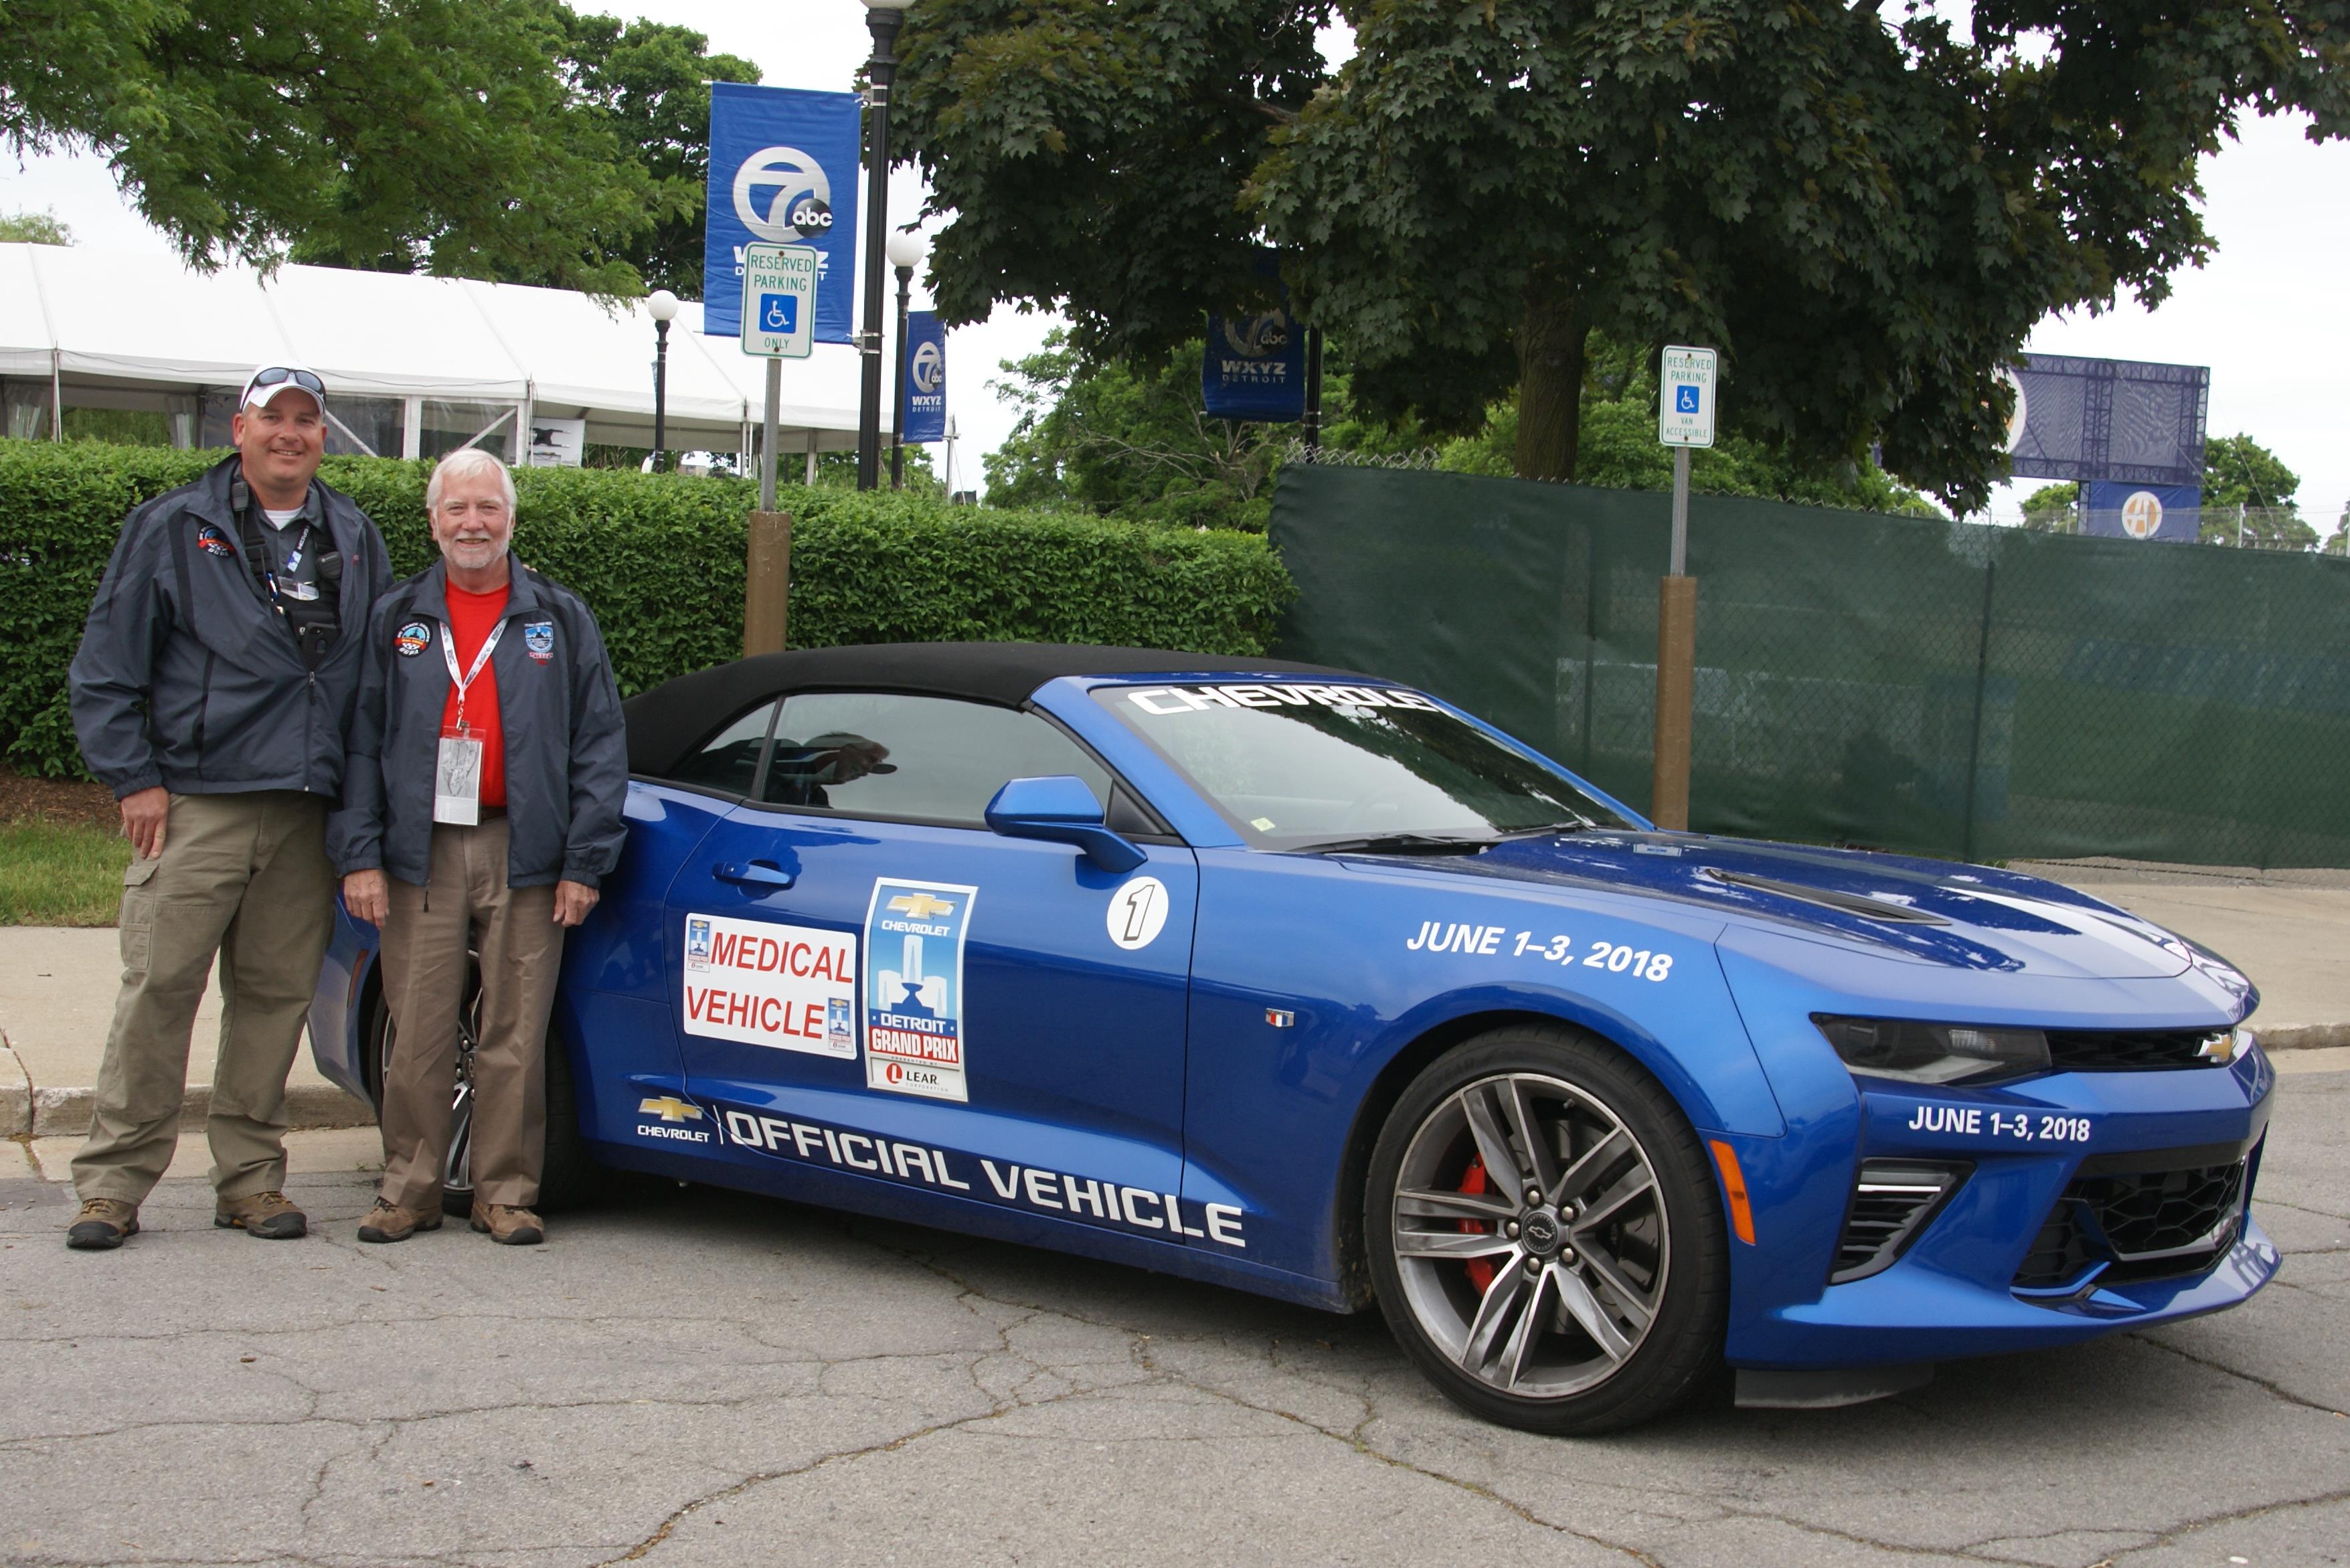 Volunteers Needed for the 2019 Chevrolet Detroit Grand Prix presented by Lear